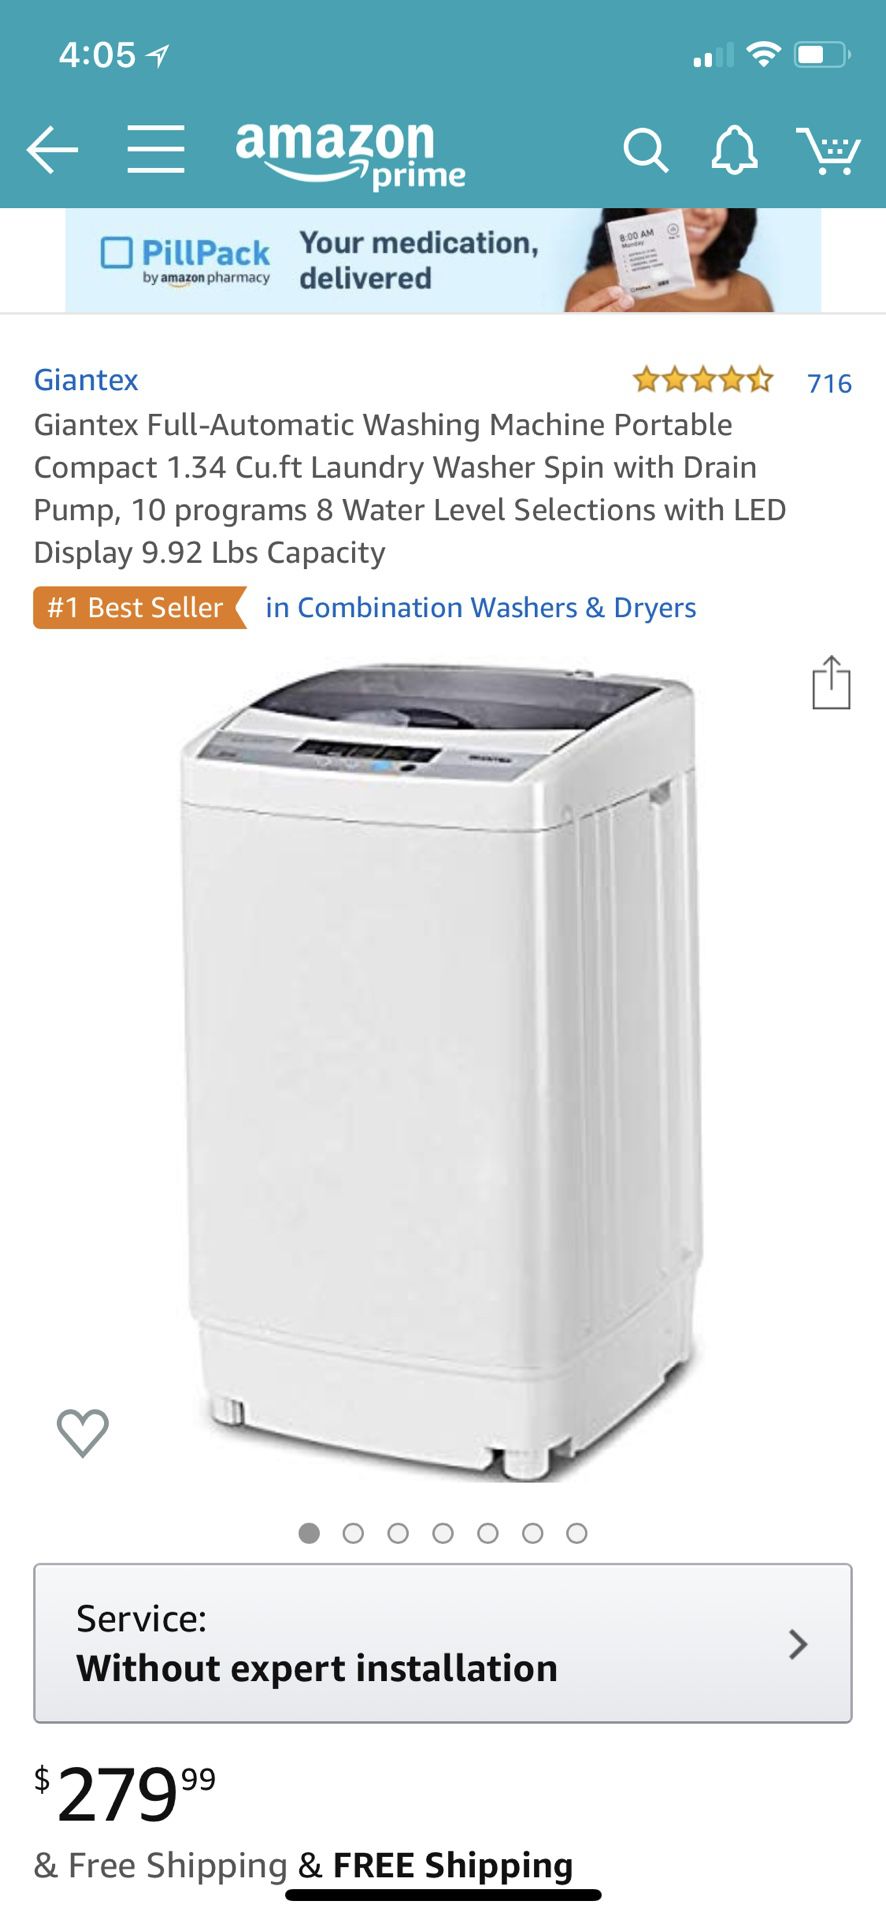 iantex 4.3 out of 5 stars 716 Reviews Giantex Full-Automatic Washing Machine Portable Compact 1.34 Cu.ft Laundry Washer Spin with Drain Pump, 10 pro